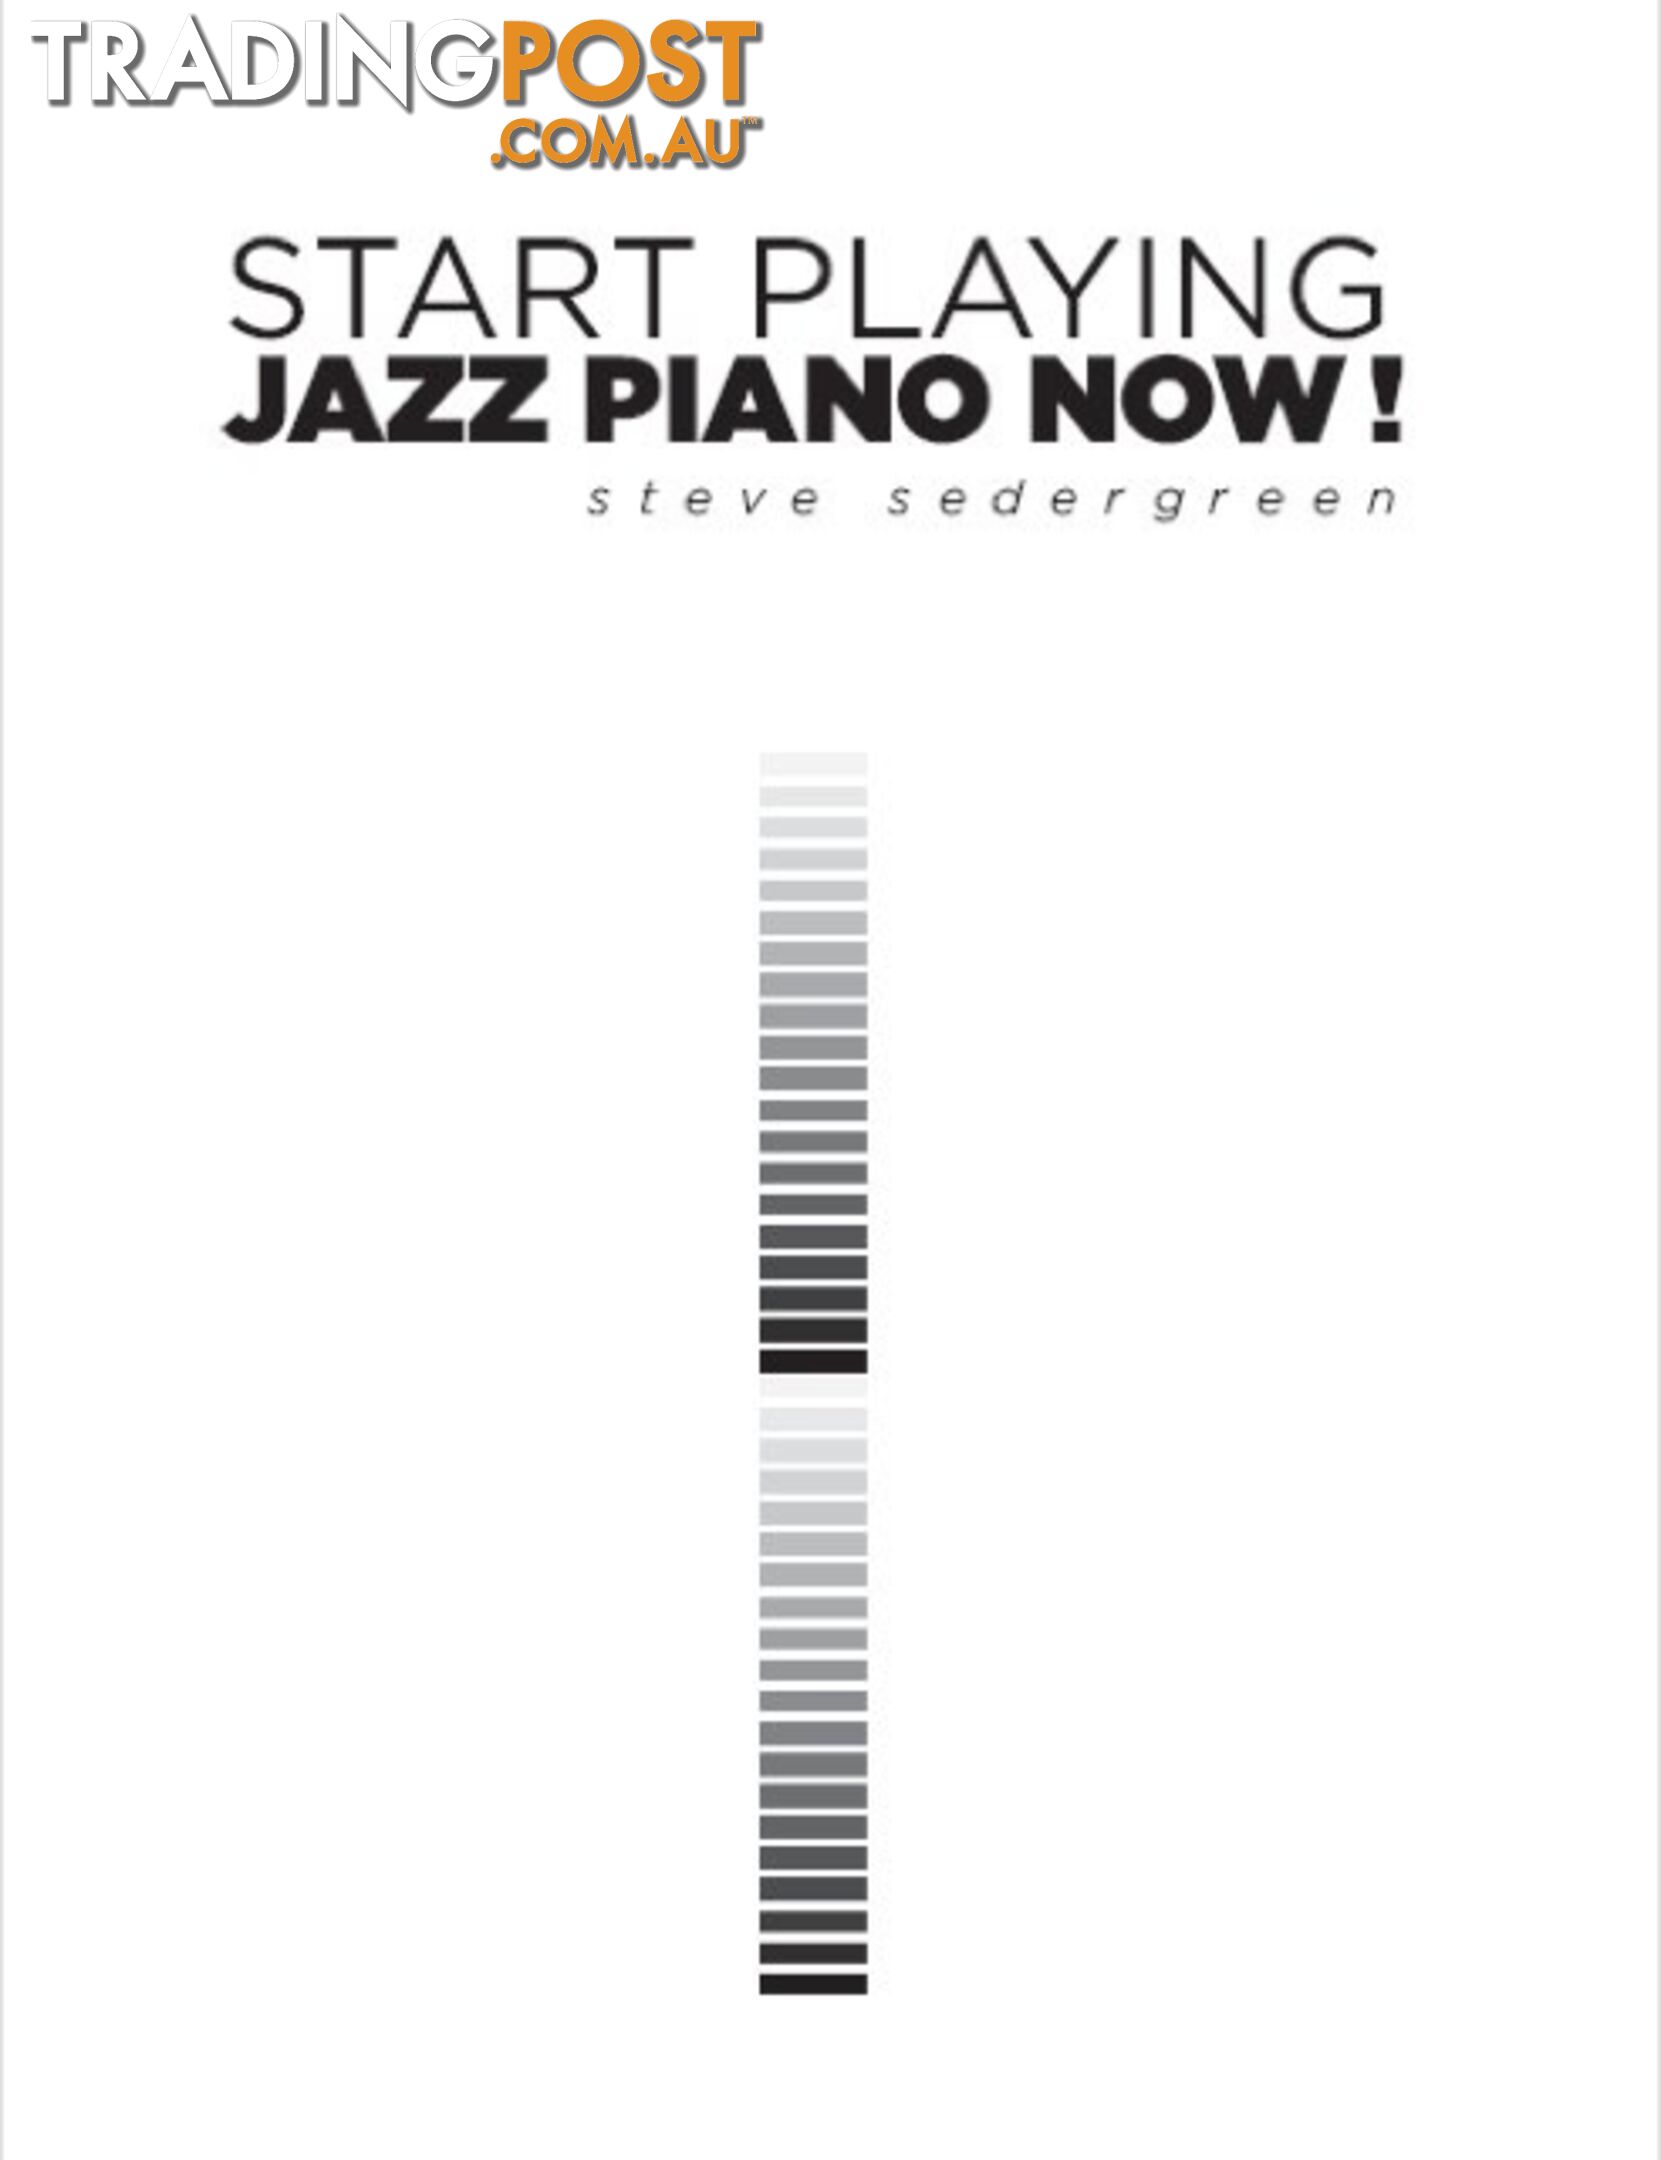 Start Playing Jazz Piano Now by Steve Sedergreen